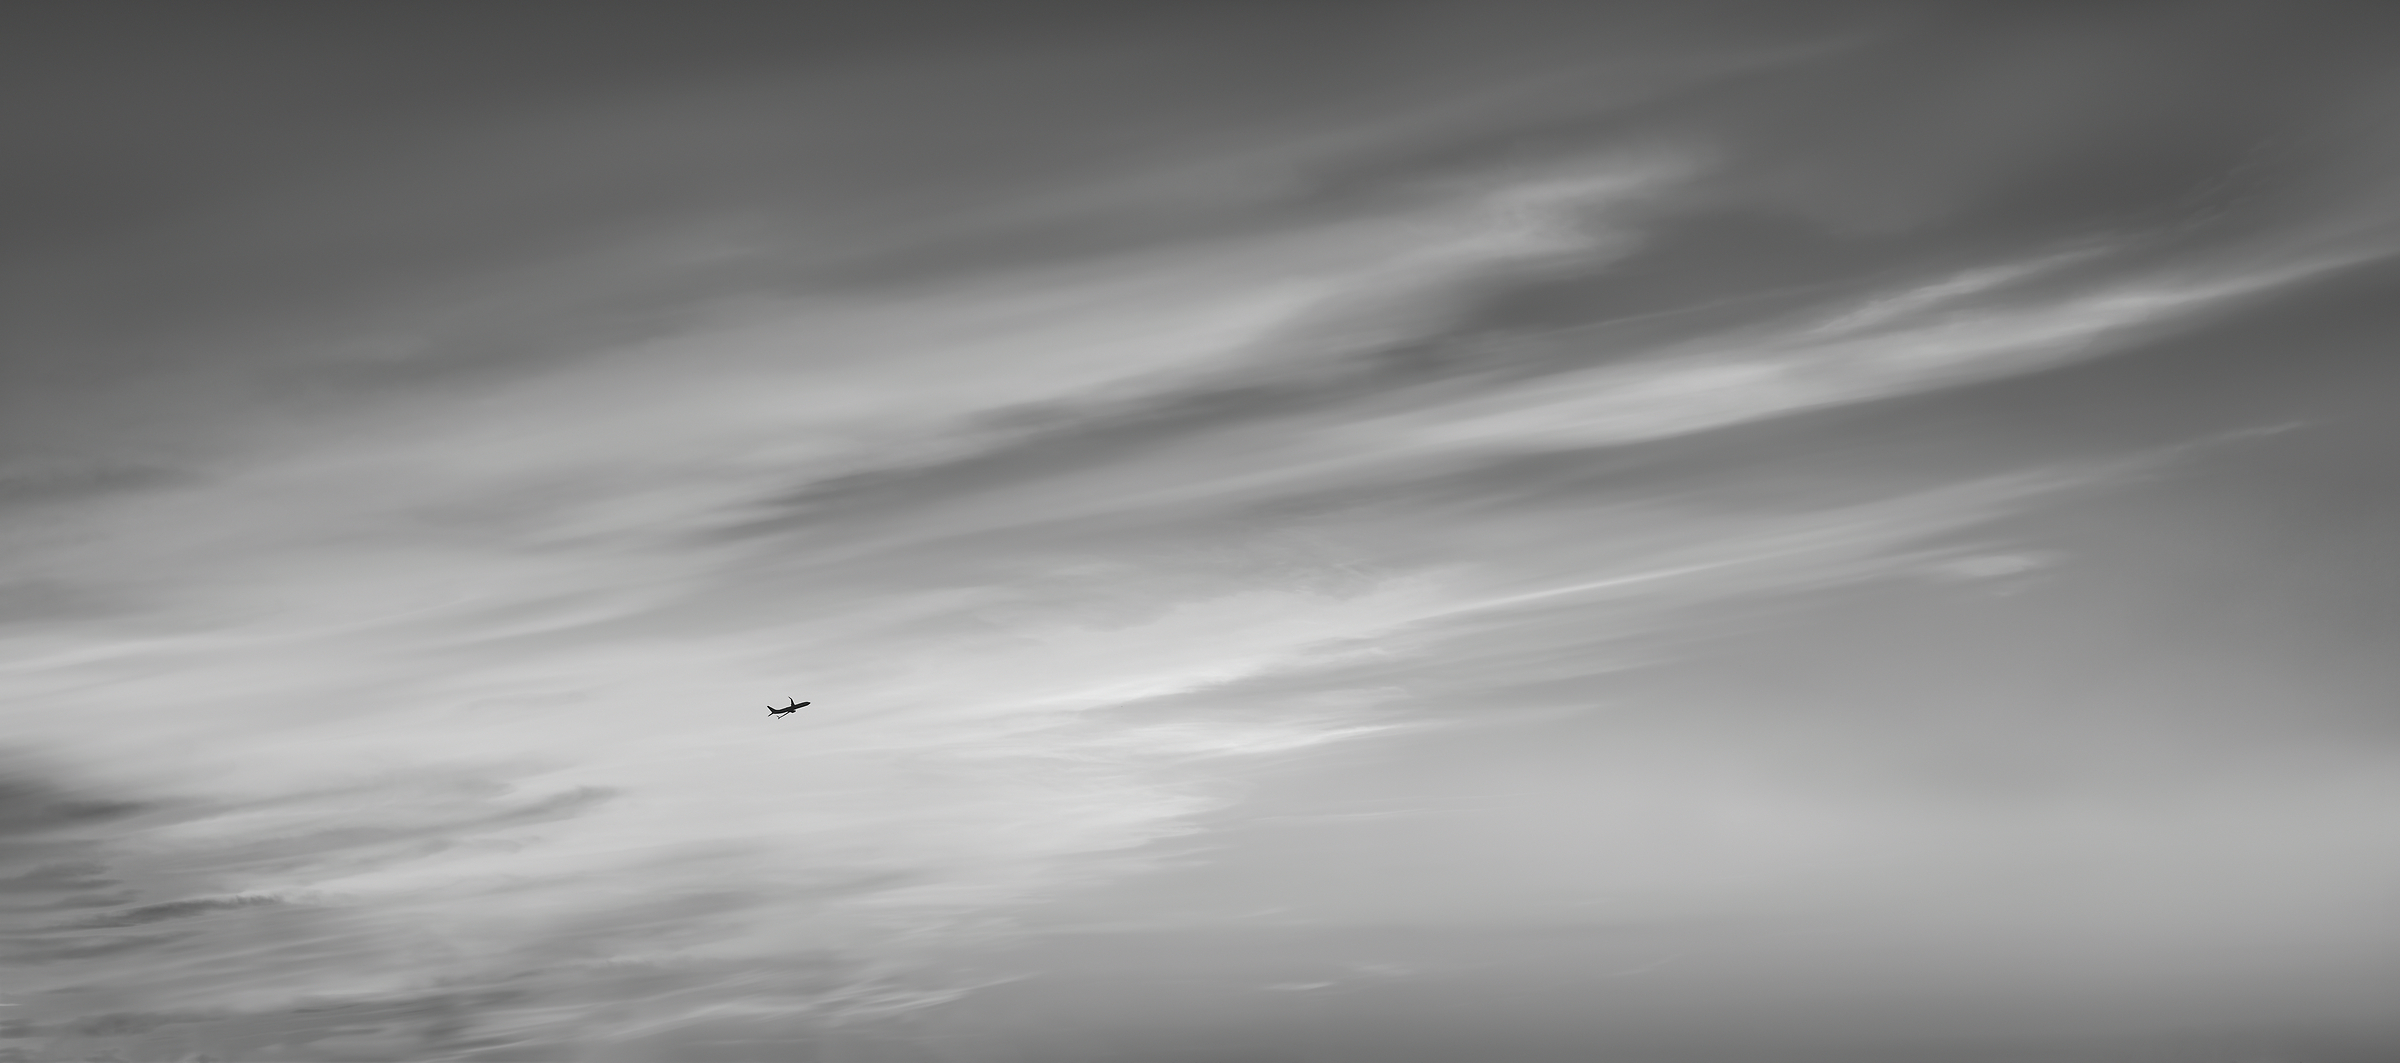 403 megapixels! A very high resolution, large-format, black & white aviation photograph created by Dan Piech in New York City